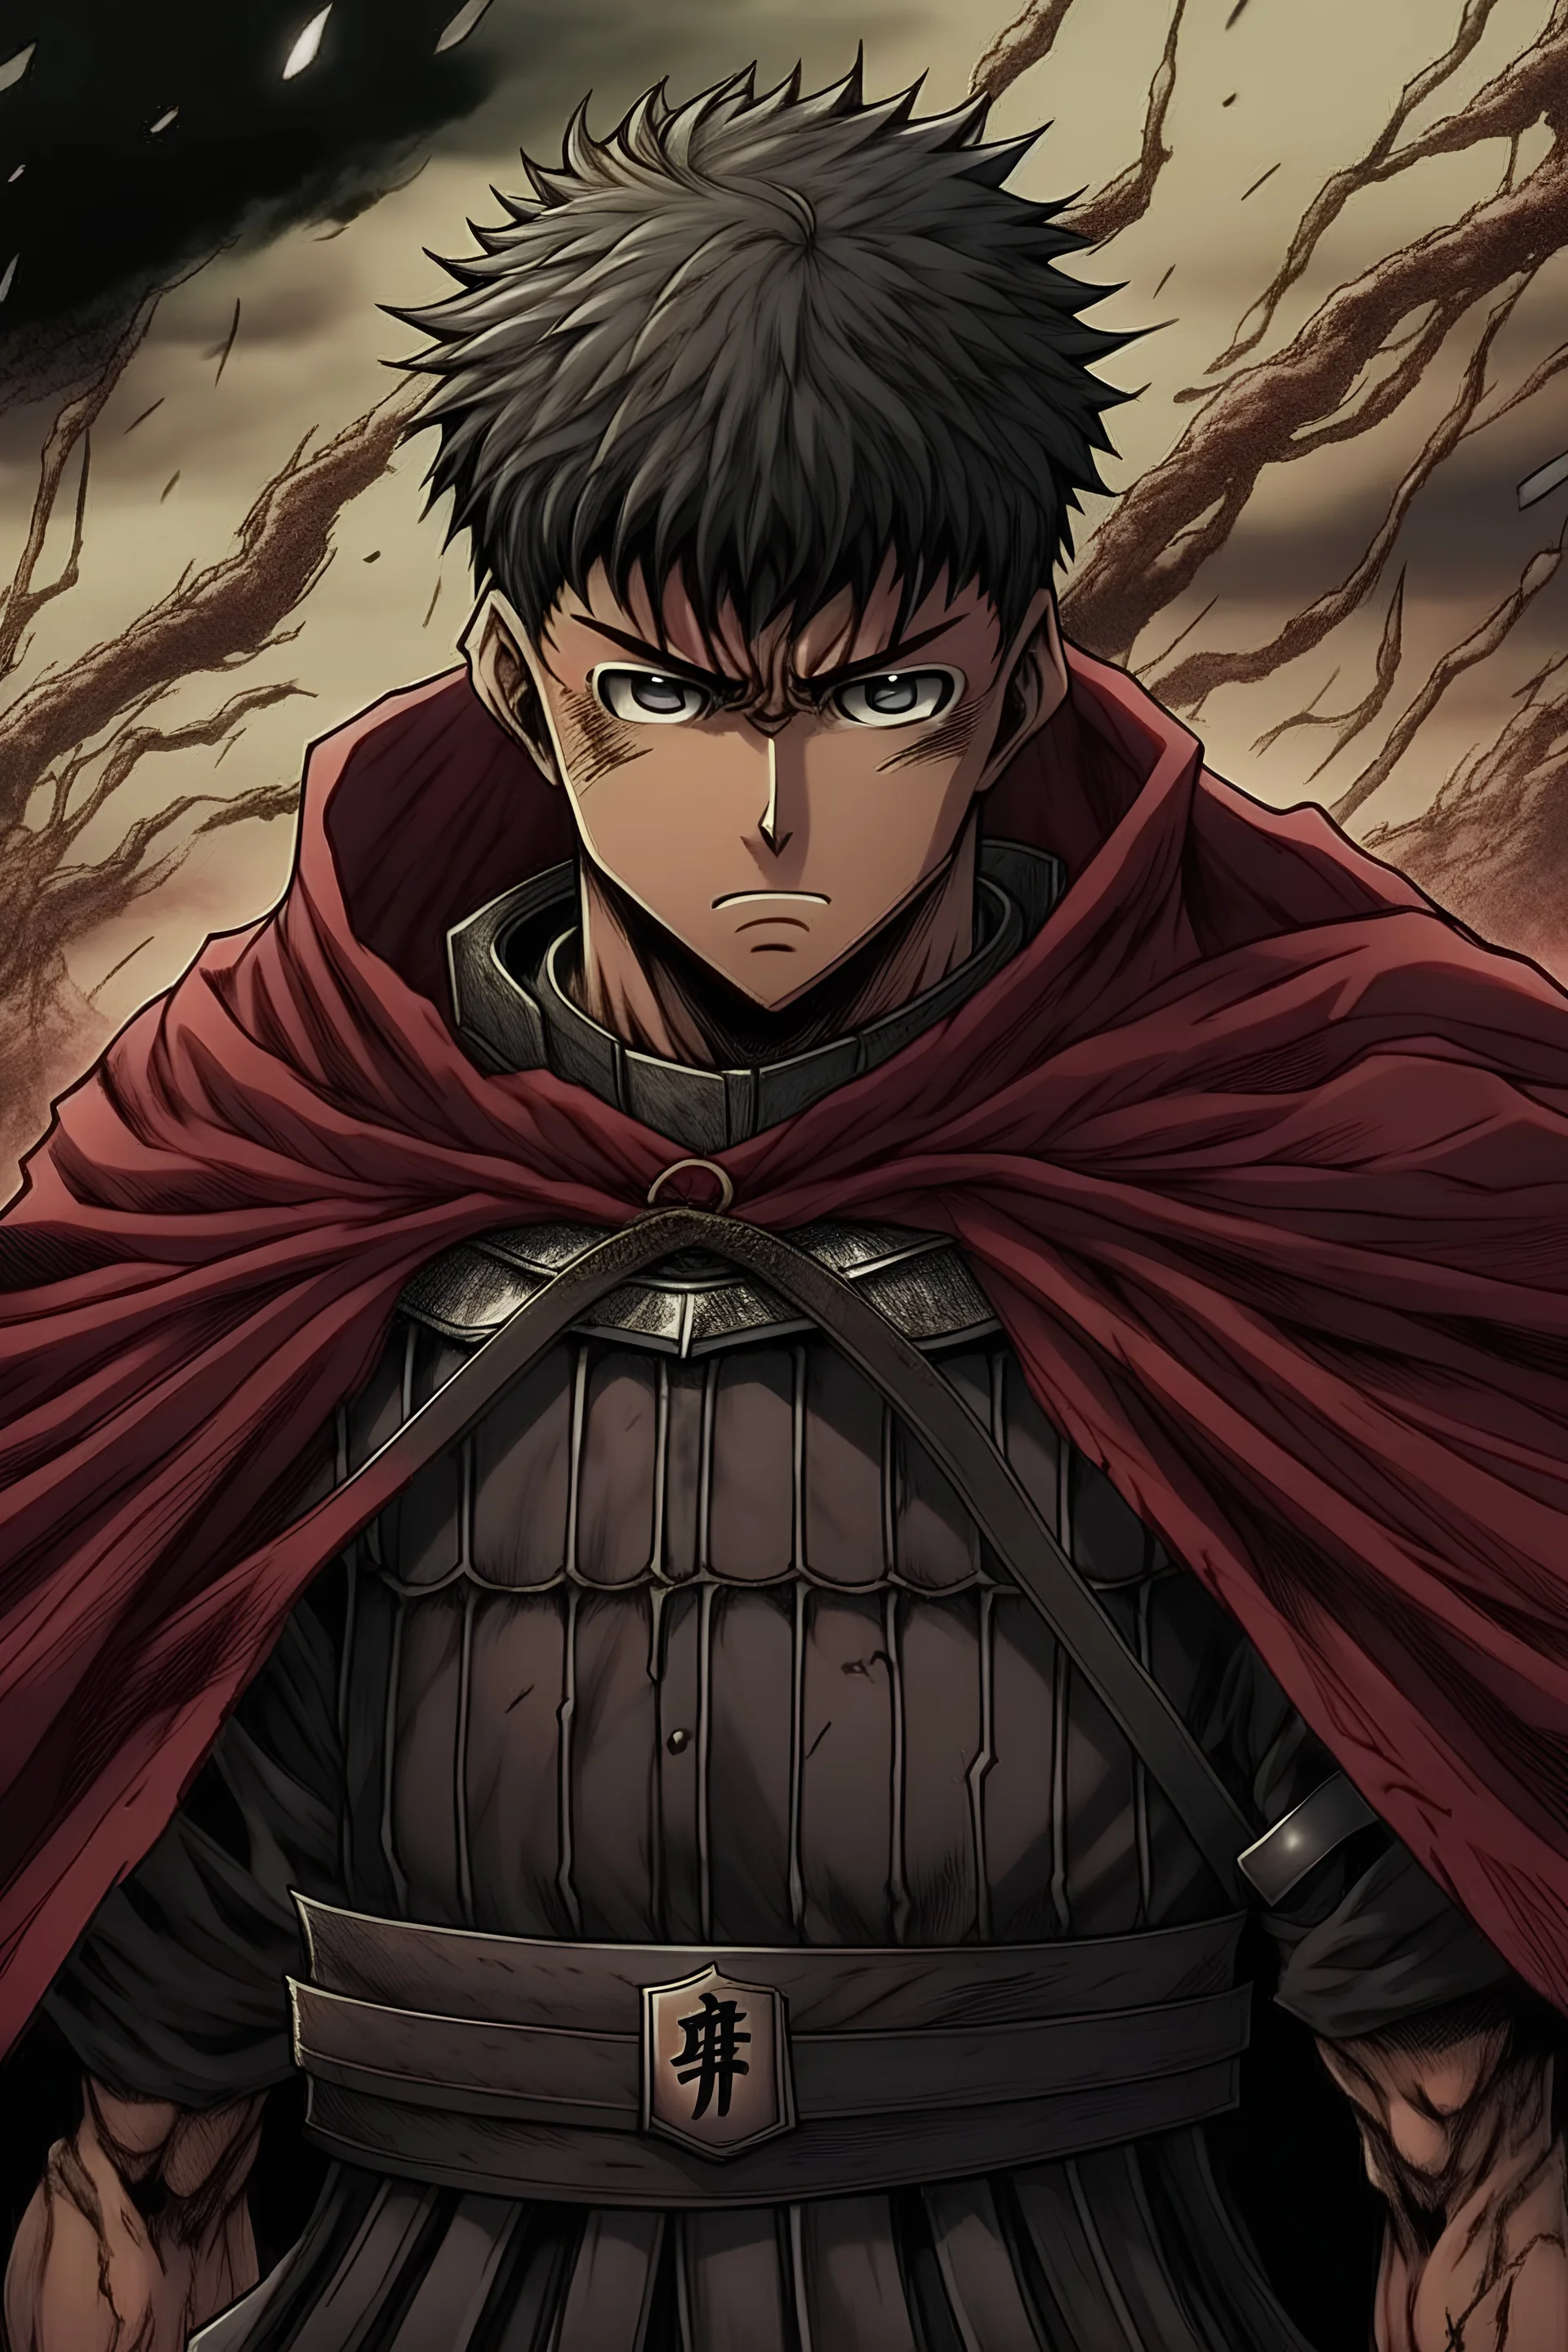 create banner with a berserk style anime character